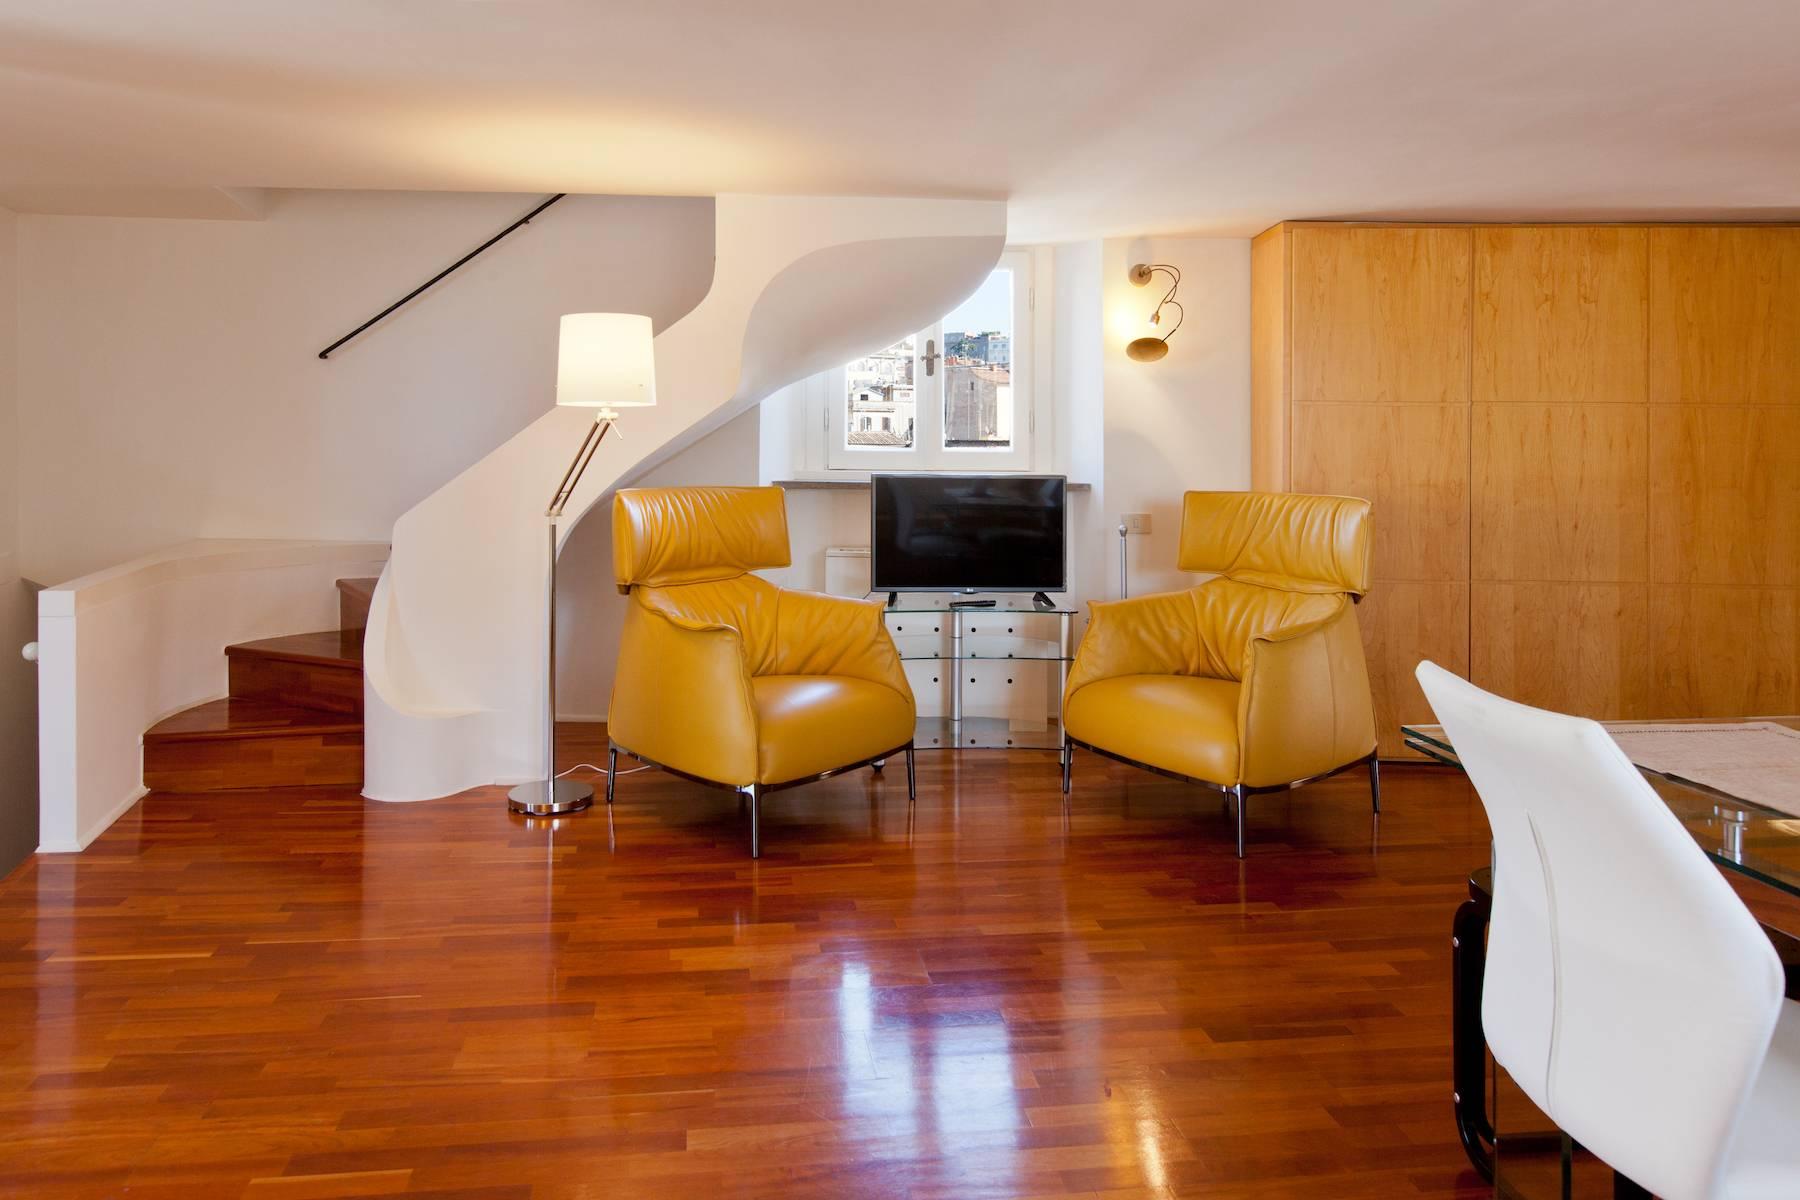 Charming penthouse located few steps from Piazza di Spagna - 10